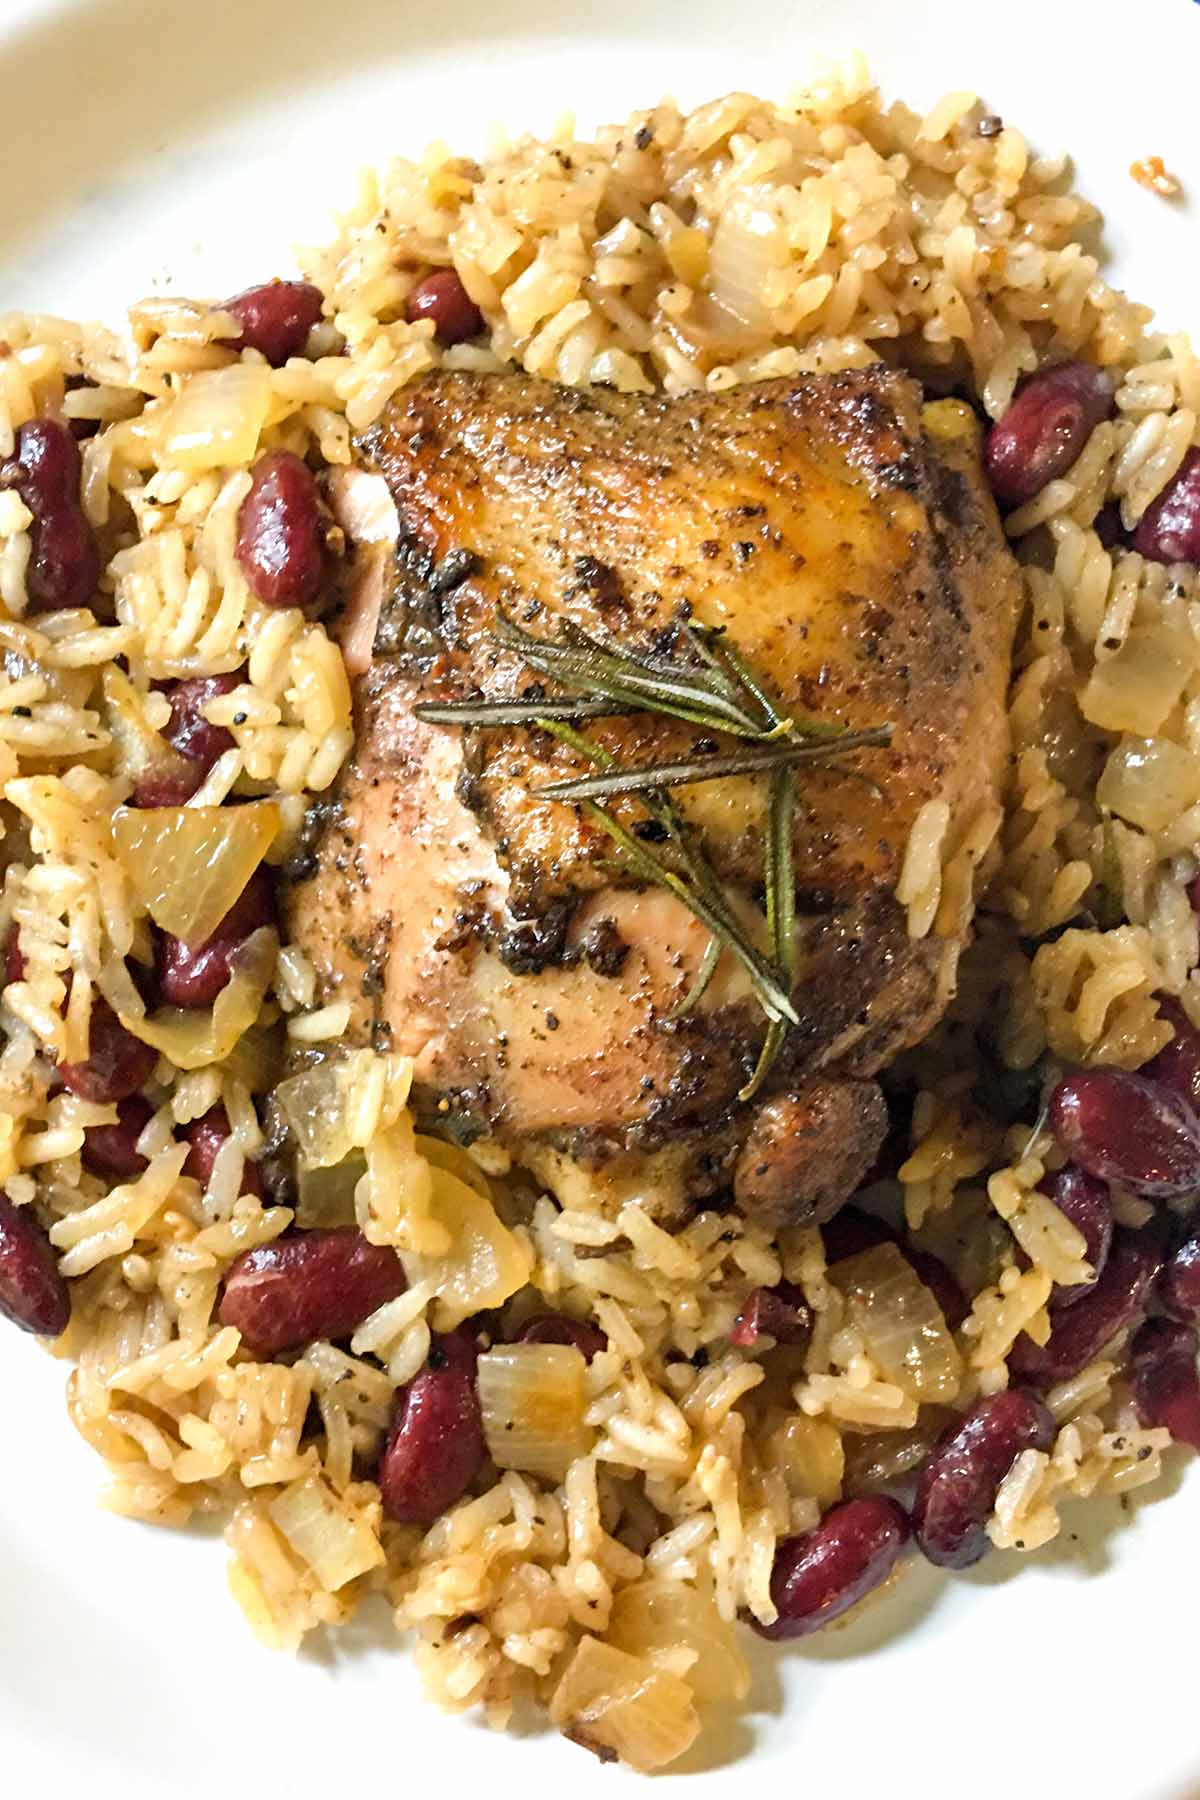 Jerk Chicken with coconut rice and red beans served on a white plate.